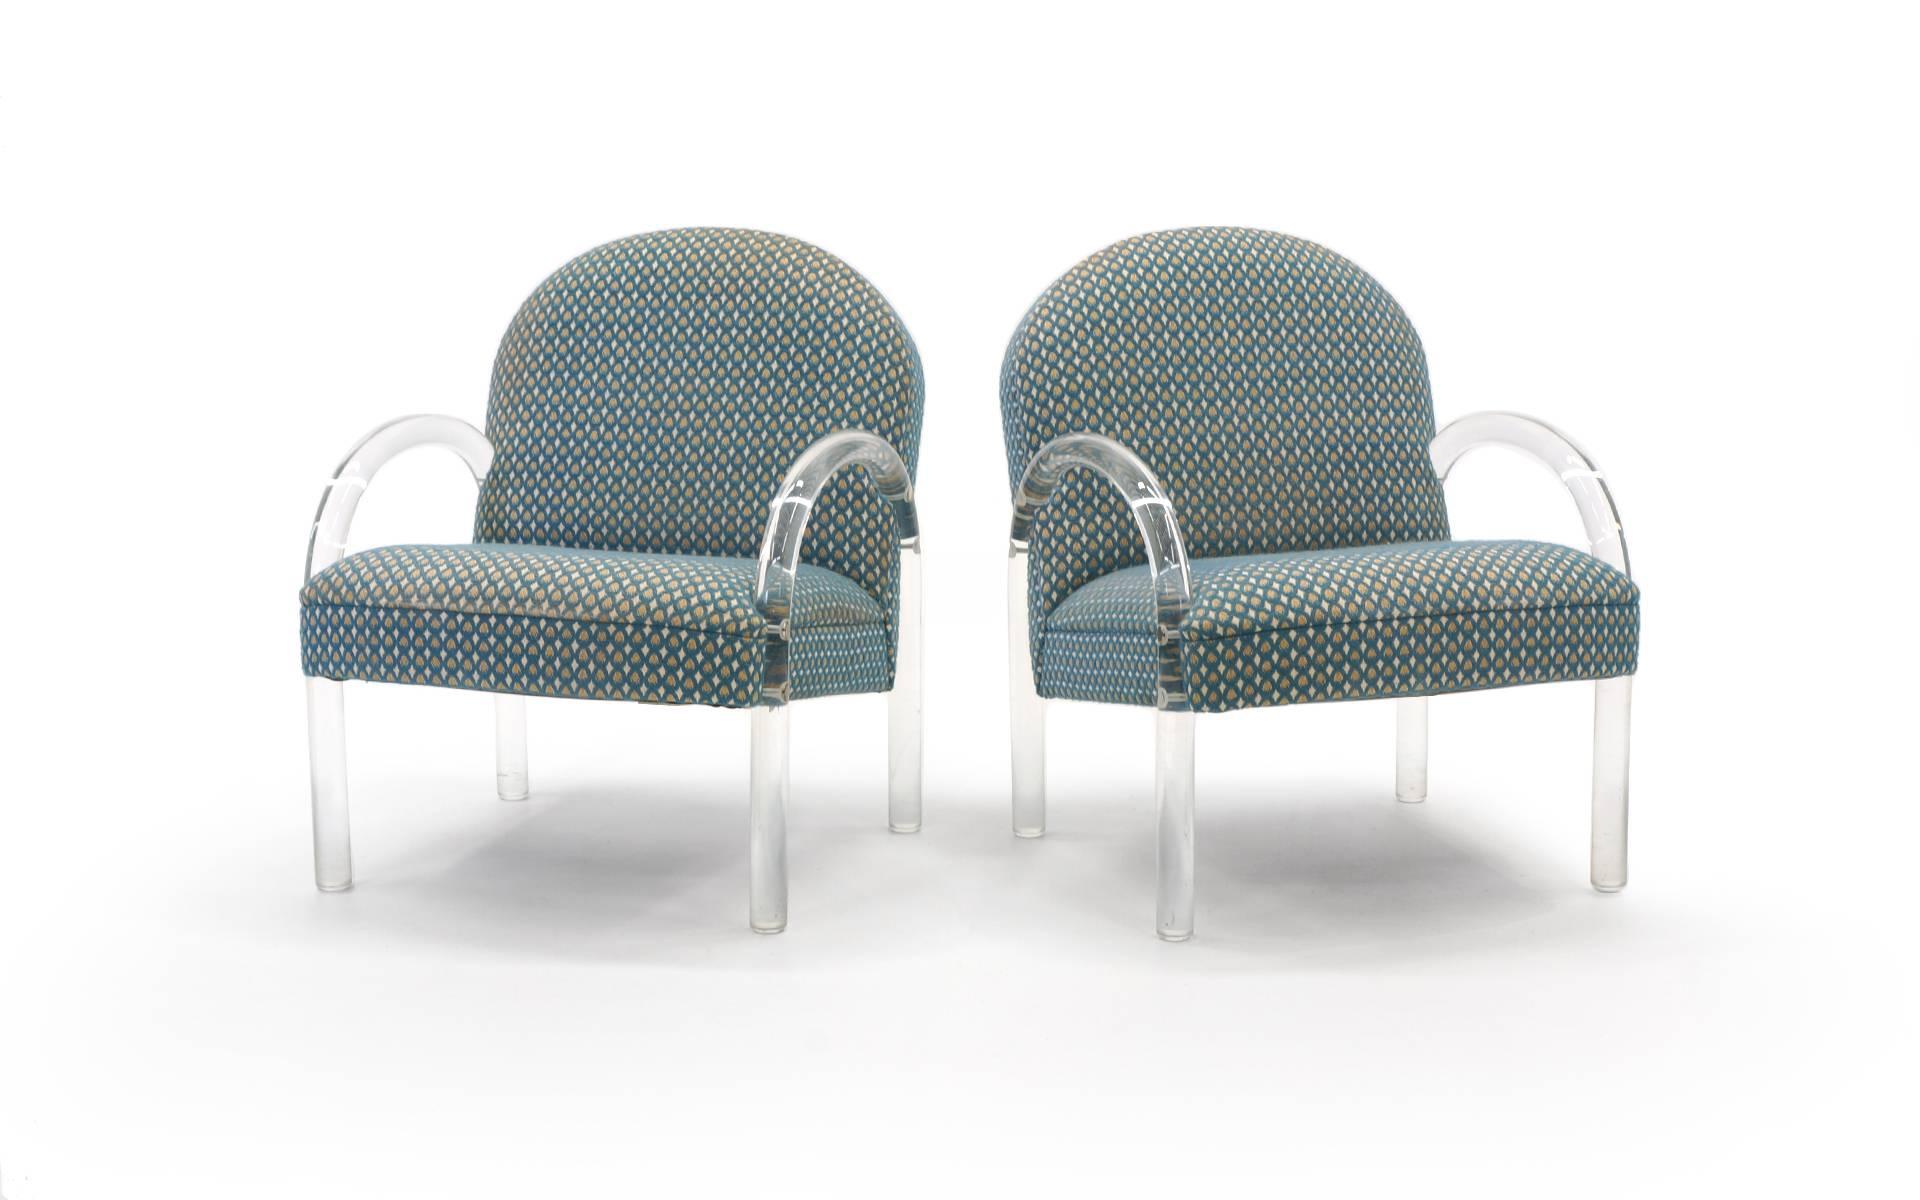 Pair of Pace Collection armchairs with Lucite / acrylic frames and original upholstery in good condition.